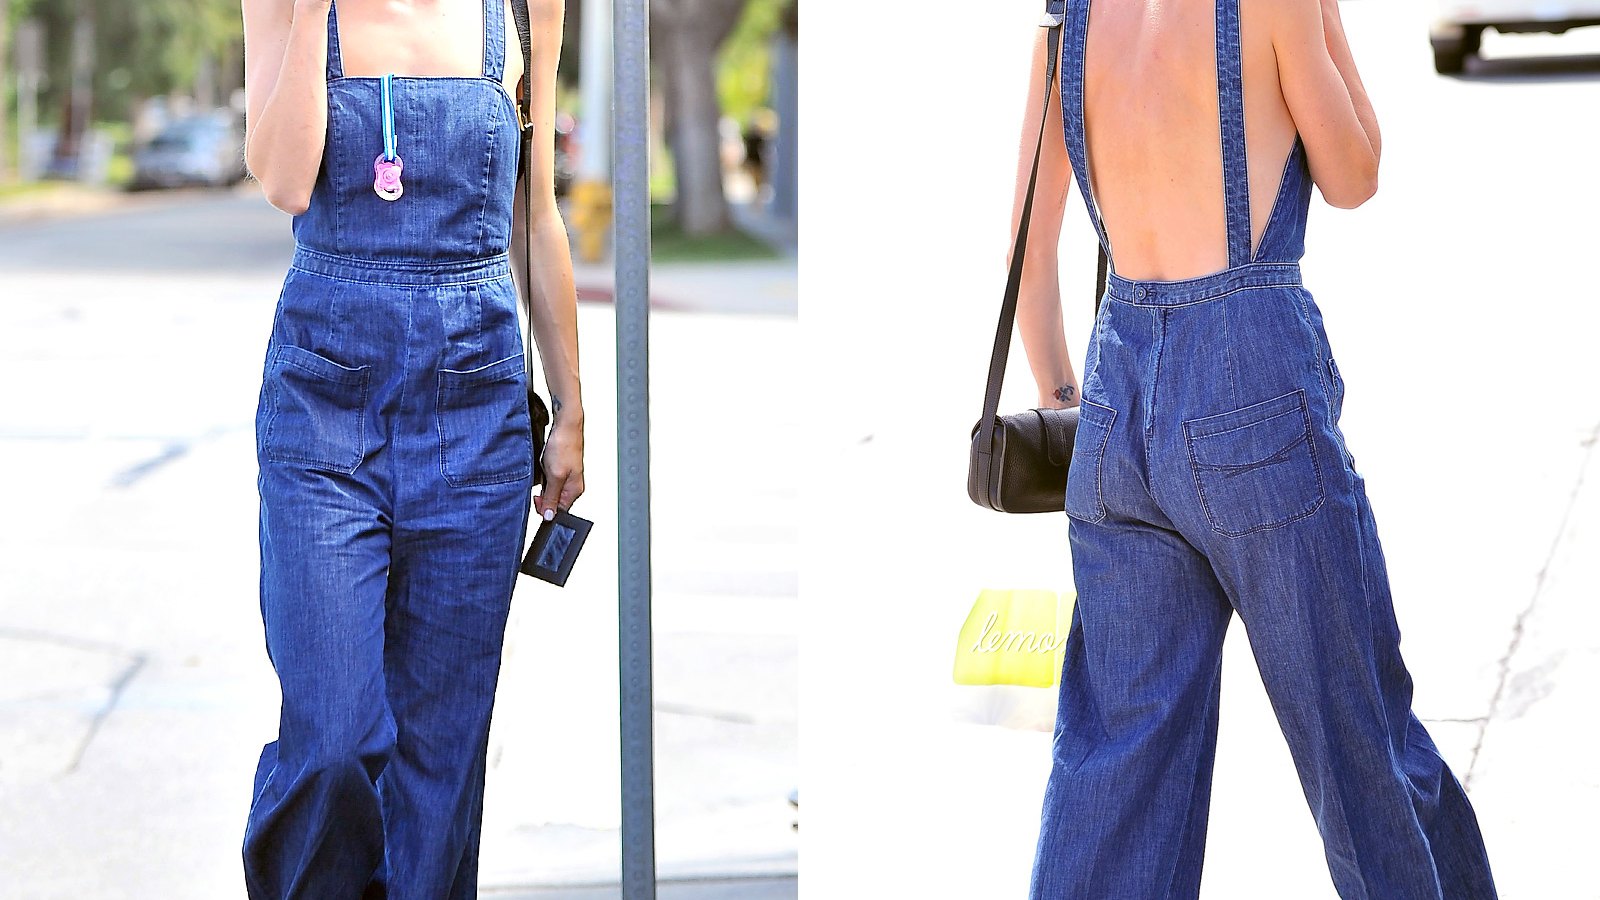 Jaime King doesn't wear a shirt under her overalls in West Hollywood